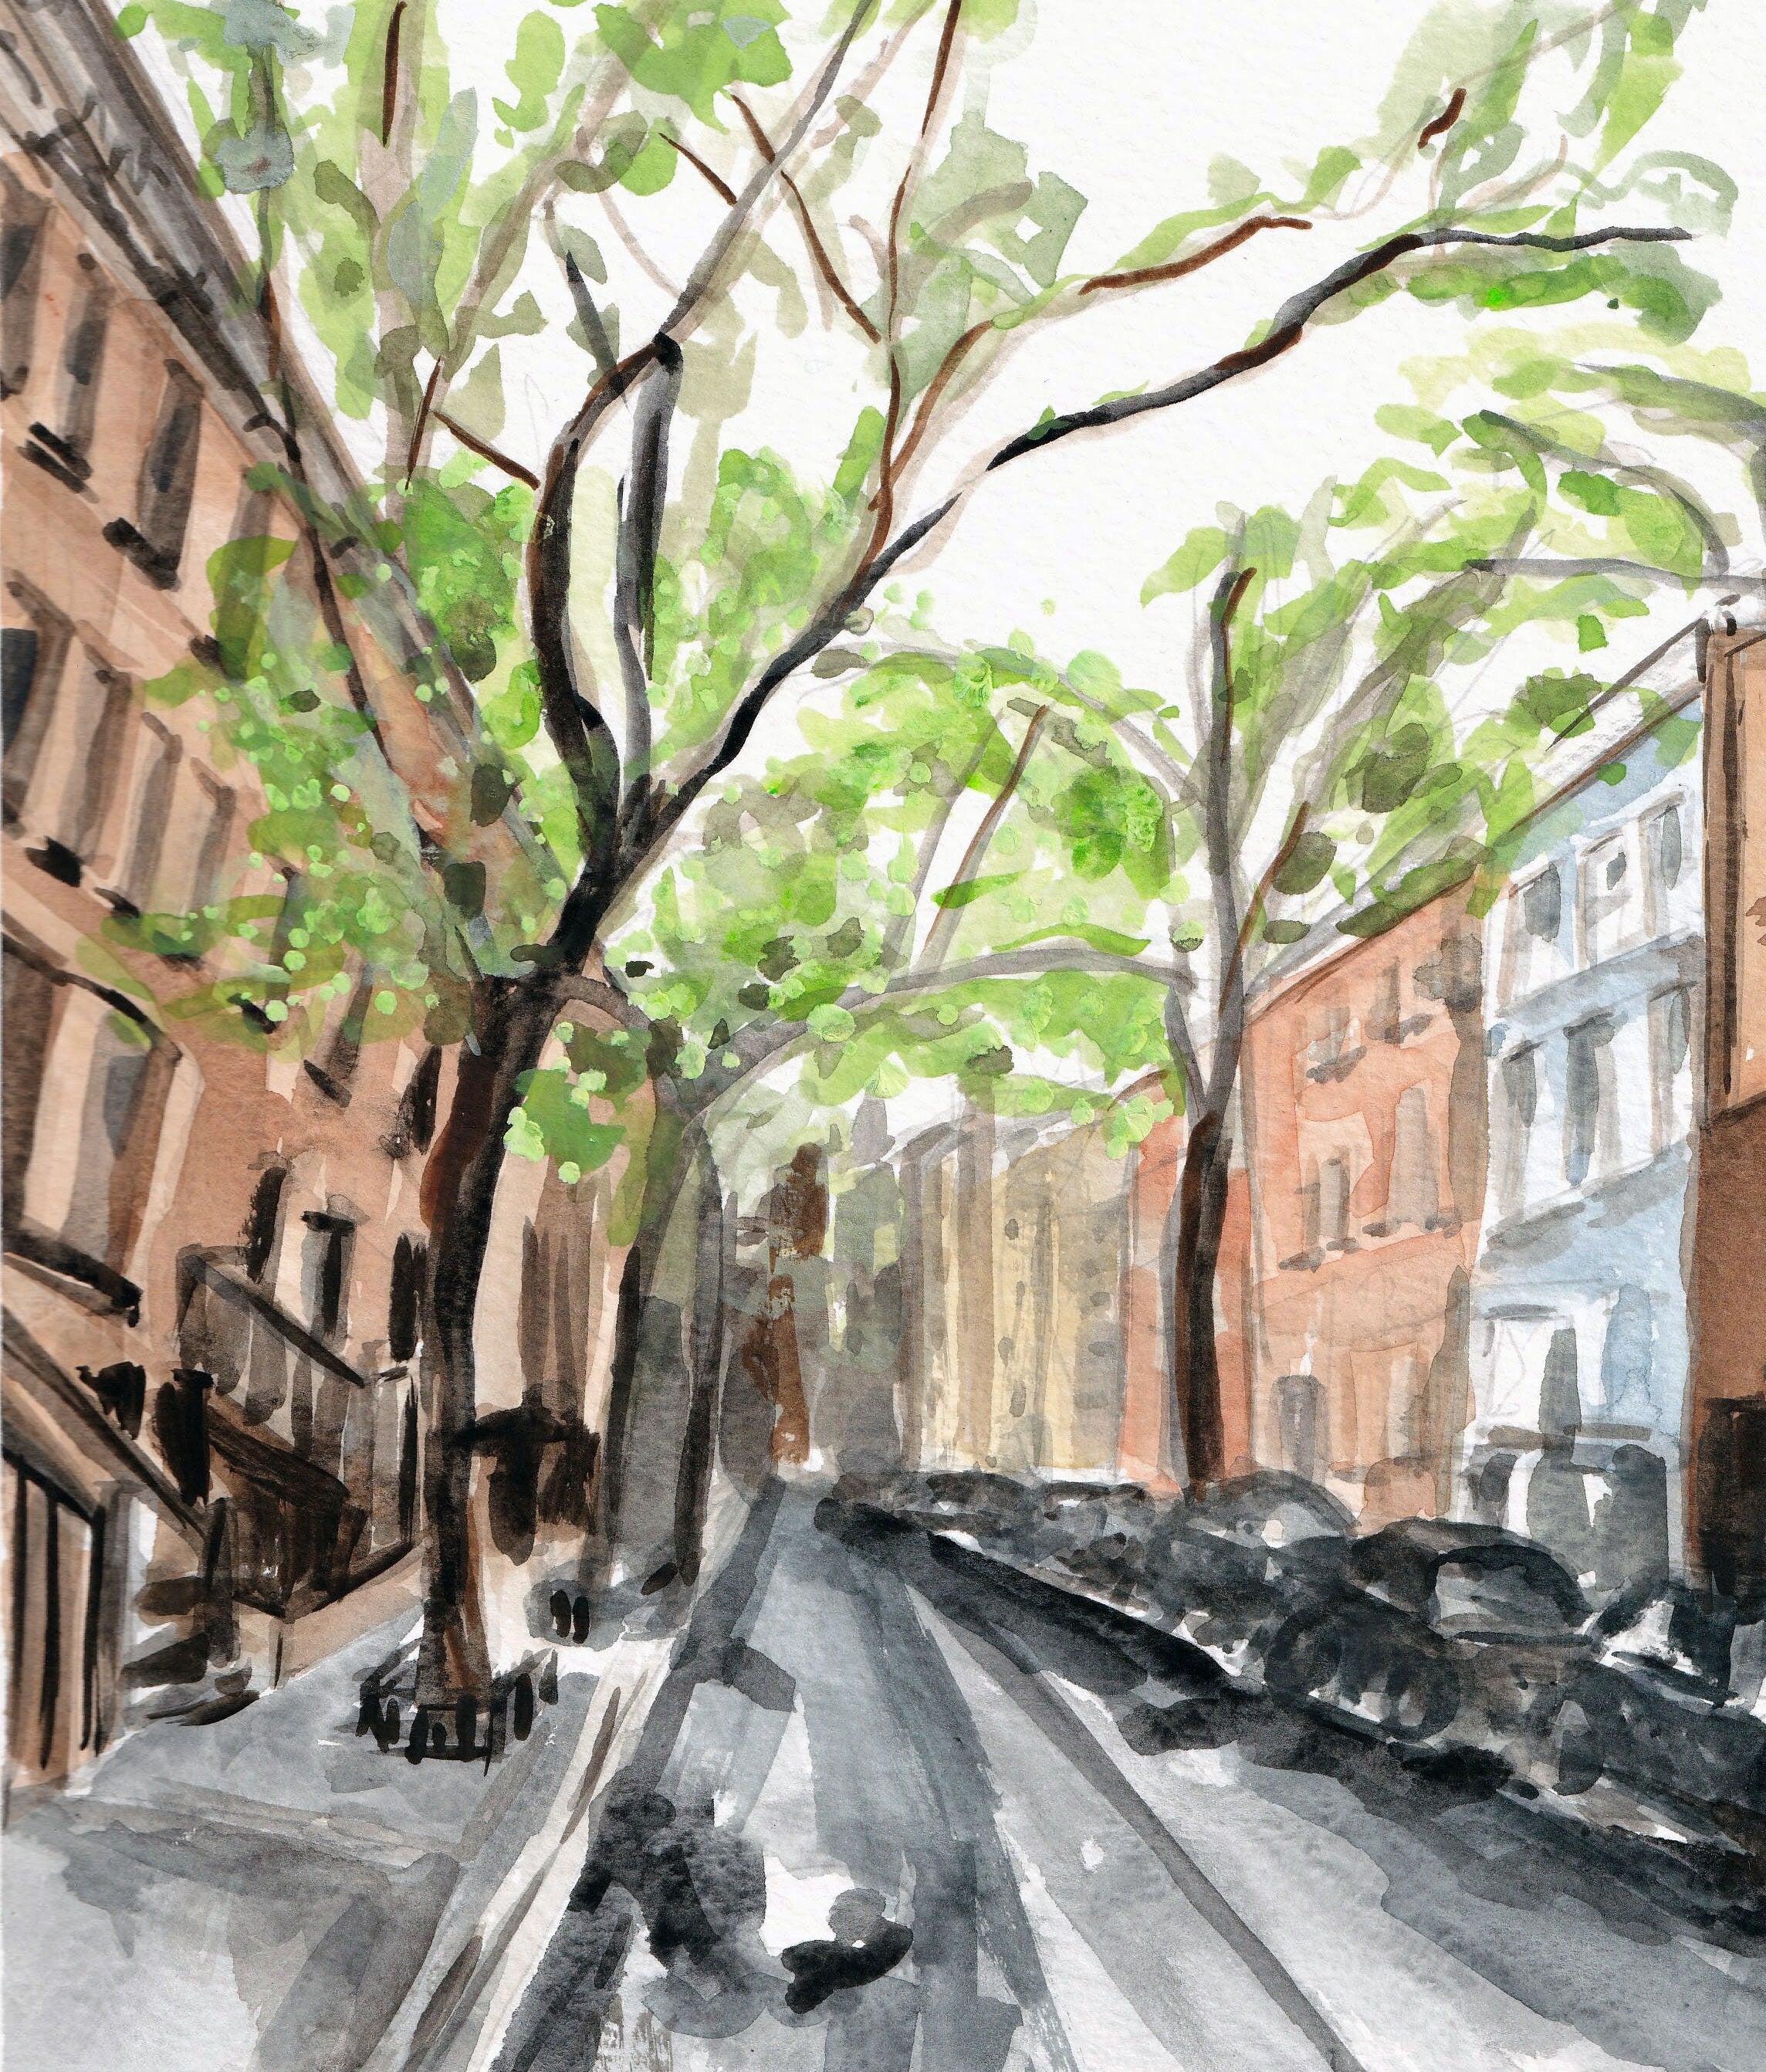 New York city streetscape print of painting by Medjool Studio. Print of original gouache painting that is a slightly abstract interpretation of the classic architecture. Shows a scene looking down a street with tall buildings, cars and trees along the sides of the street.